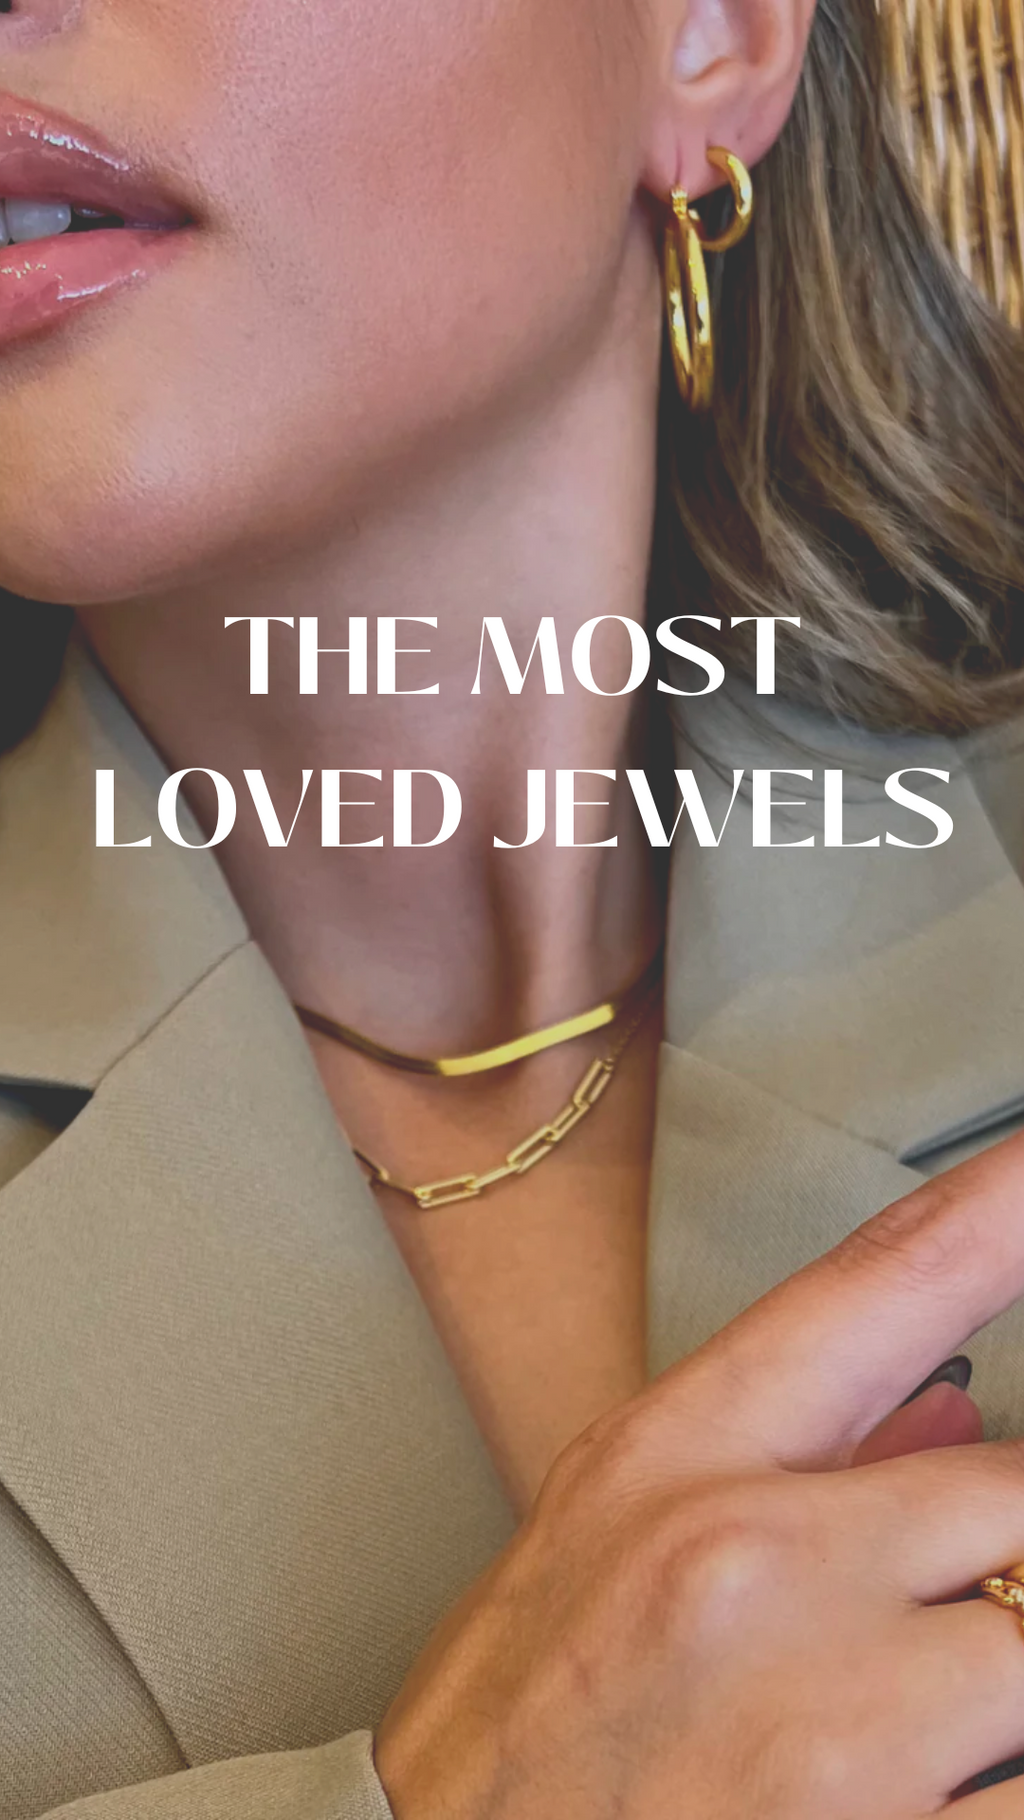 Our Founder's top 4 jewelry pieces